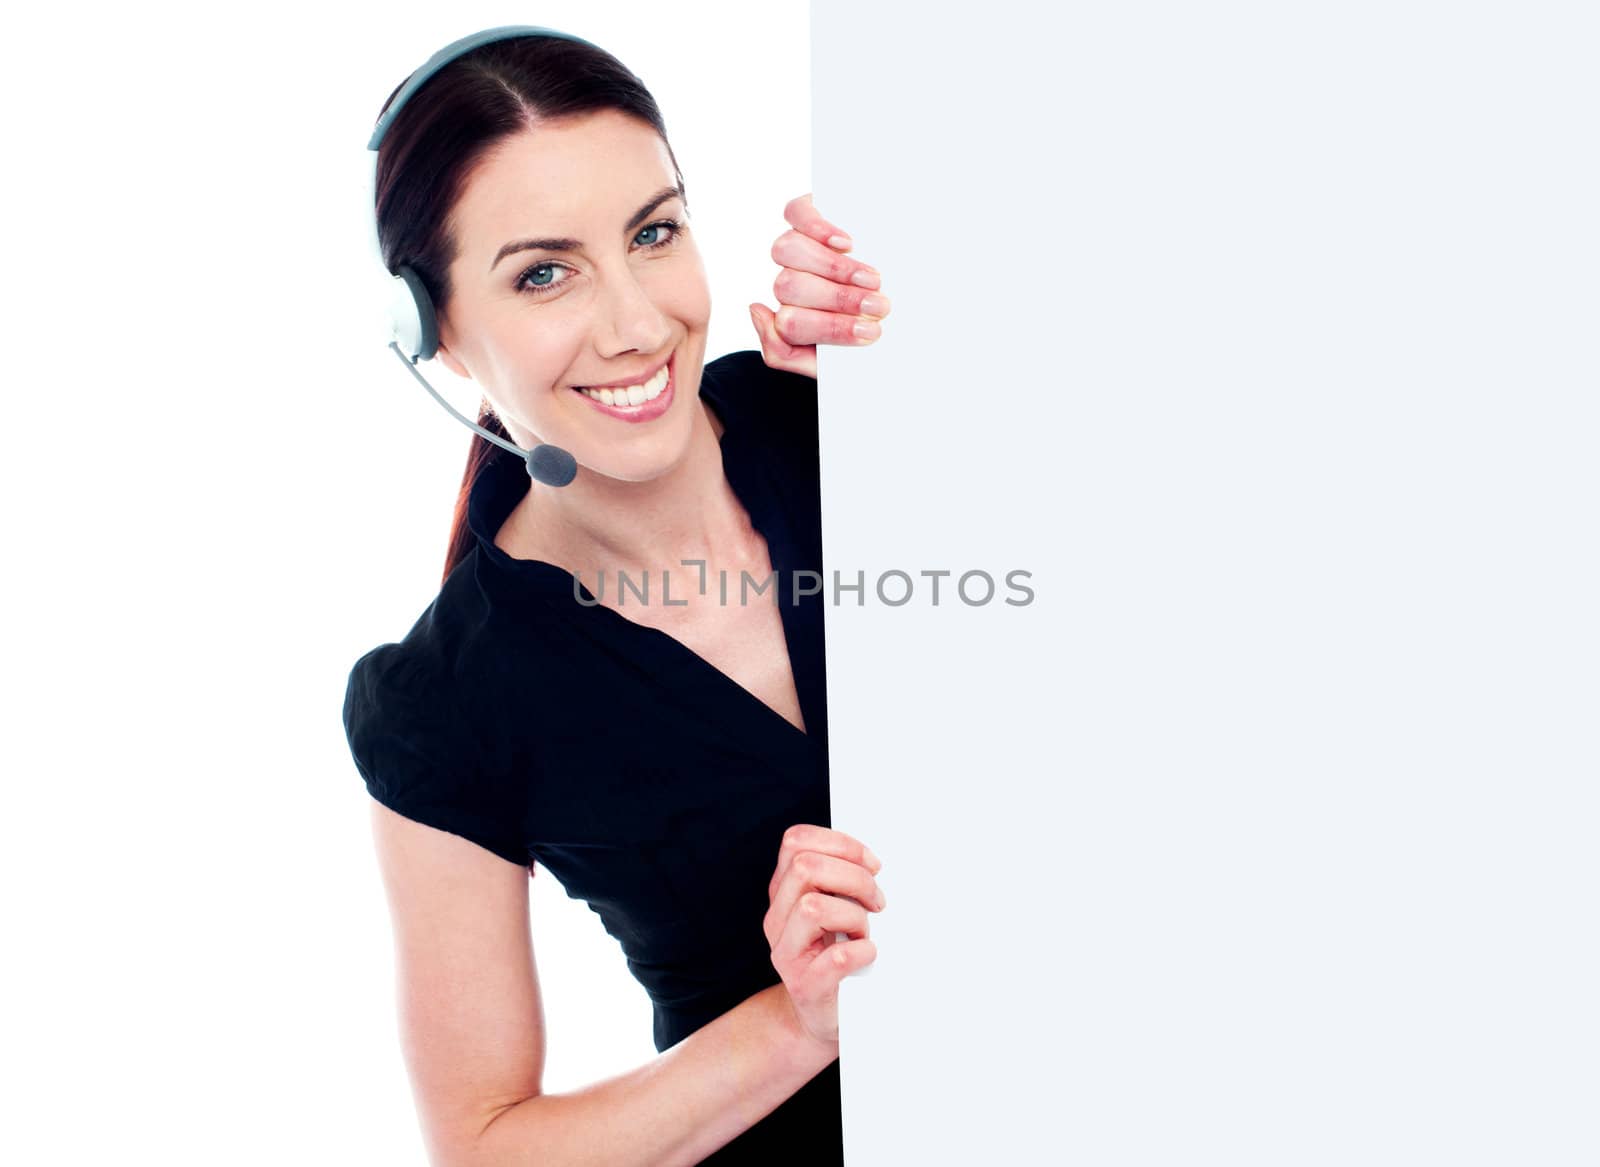 Business woman with headset and banner ad isolated over white background